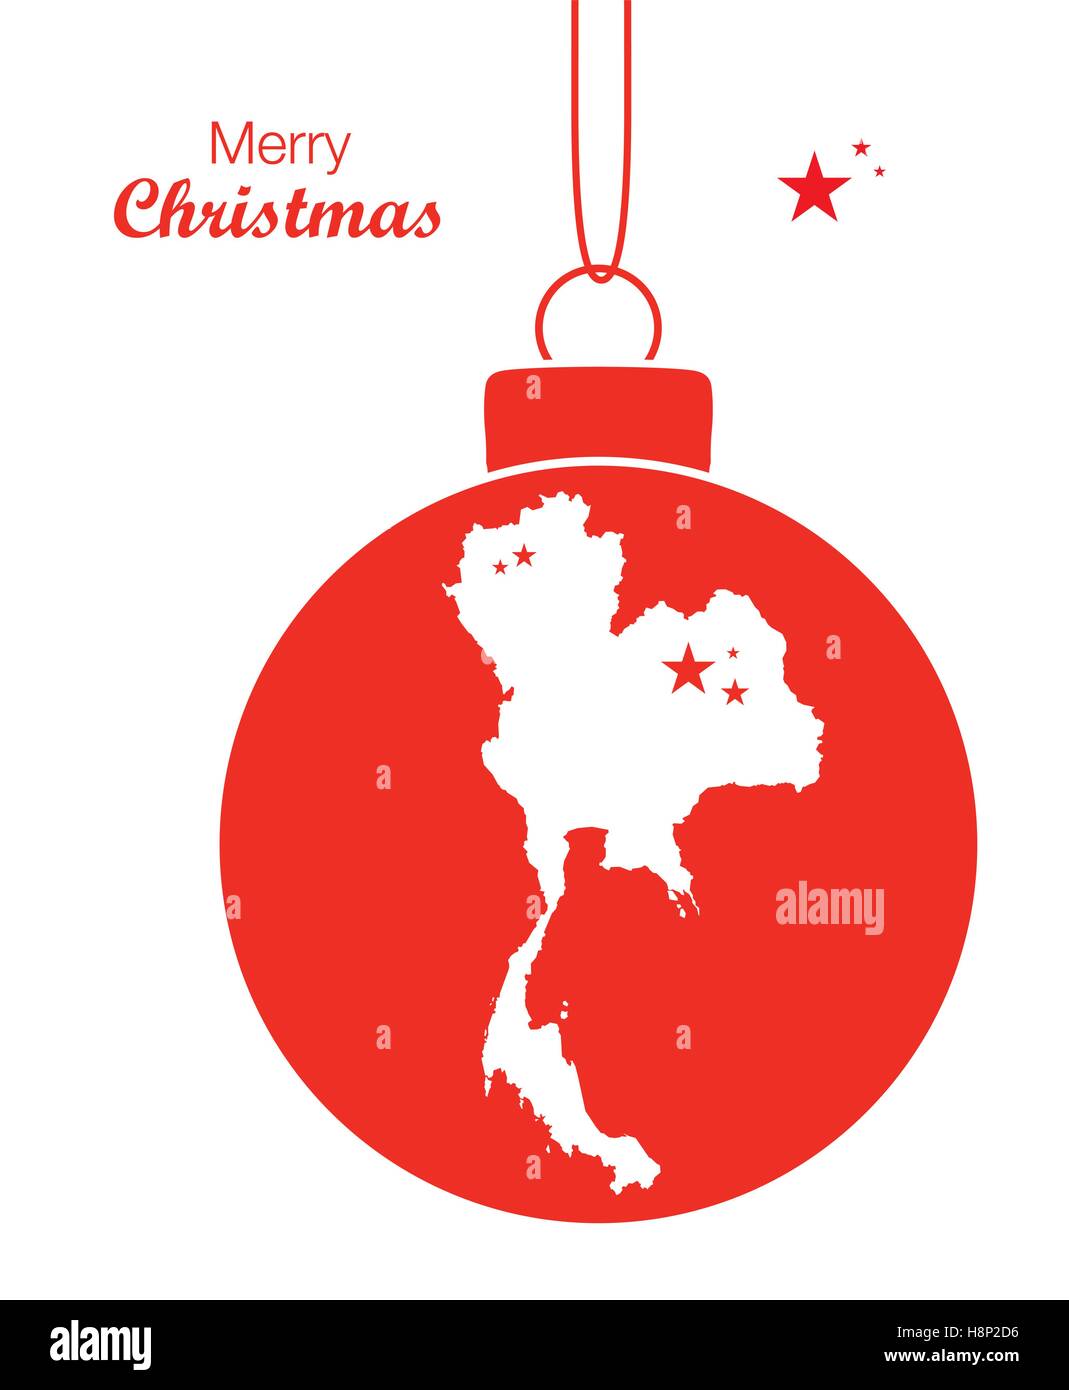 Merry Christmas illustration theme with map of Thailand Stock Vector